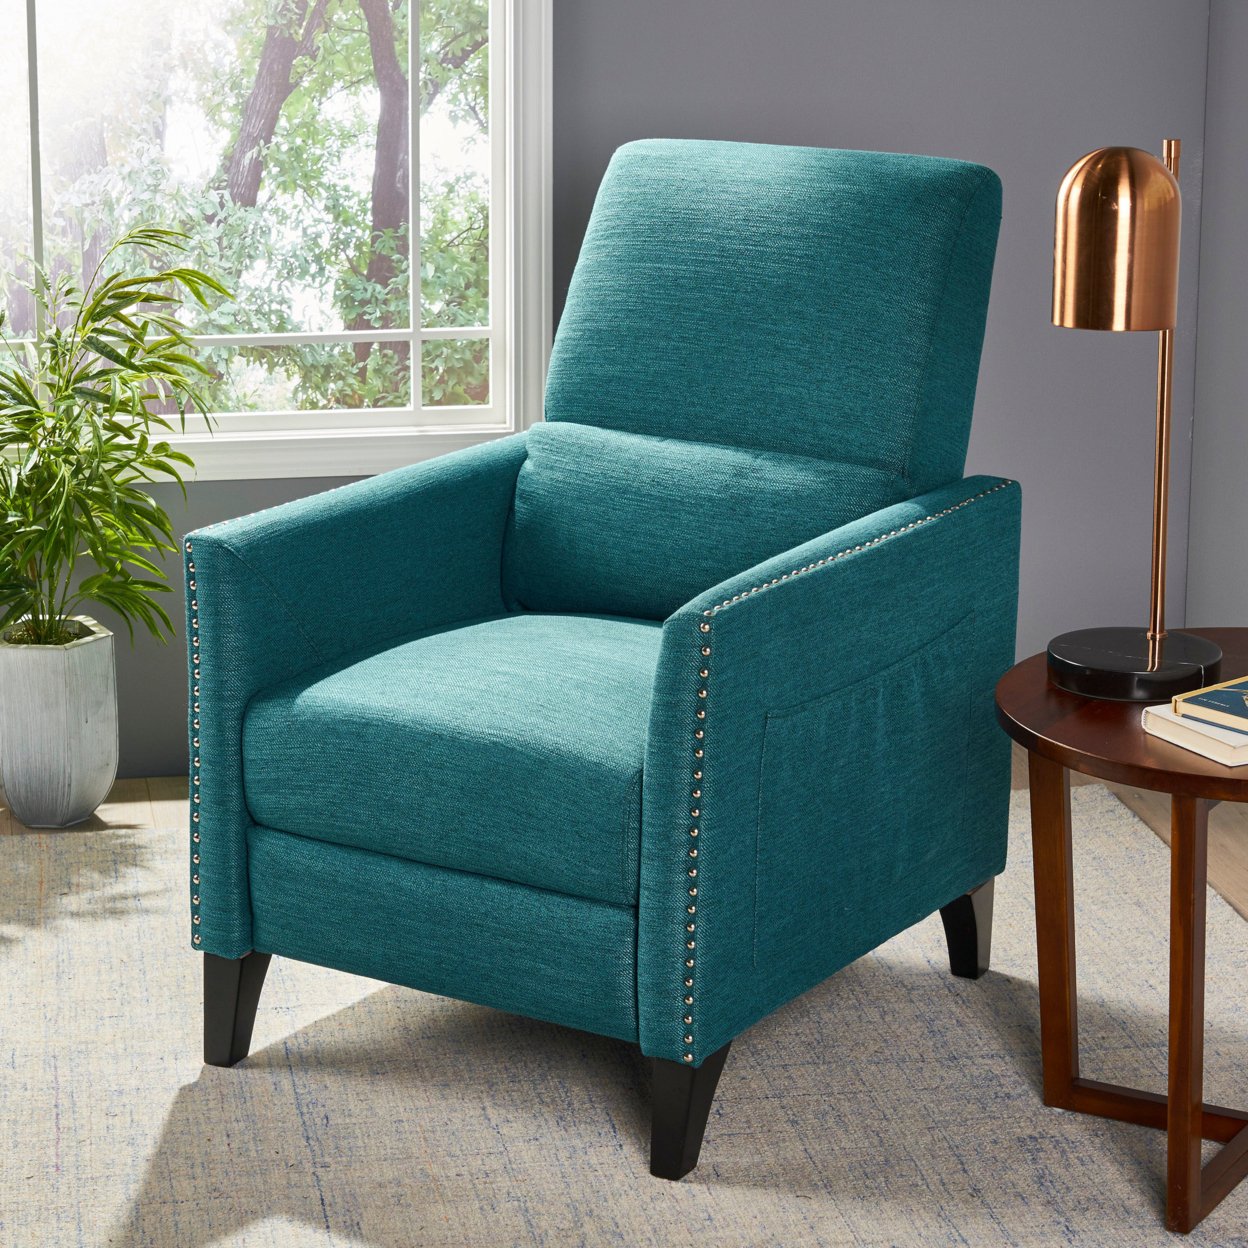 Alexis Contemporary Fabric Push Back Recliner - teal + dark brown